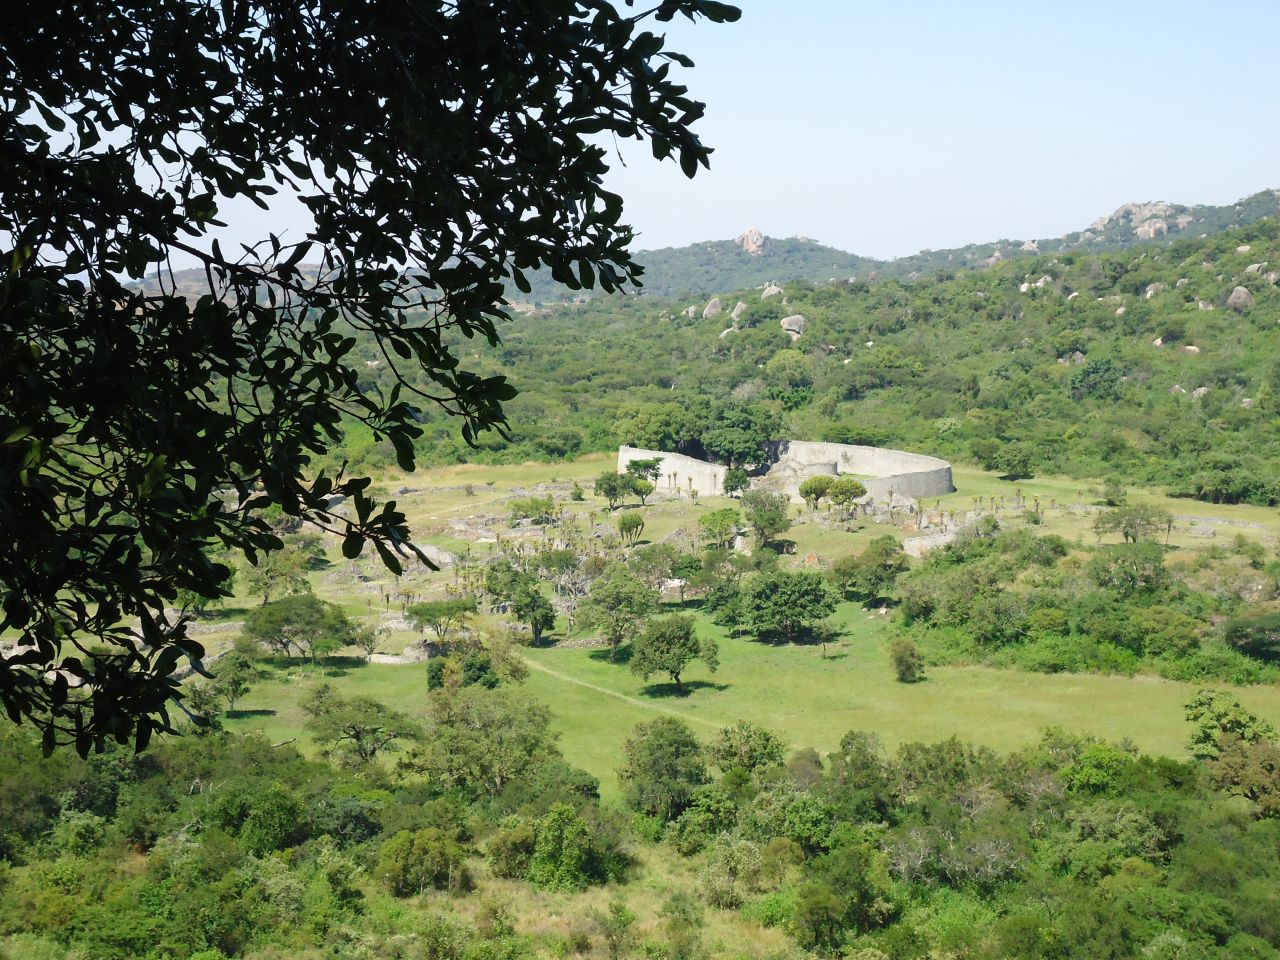 The archeological remains of Great Zimbabwe are divided in three main zones: the Hill Complex, the Great Enclosure and the Valley Ruins.